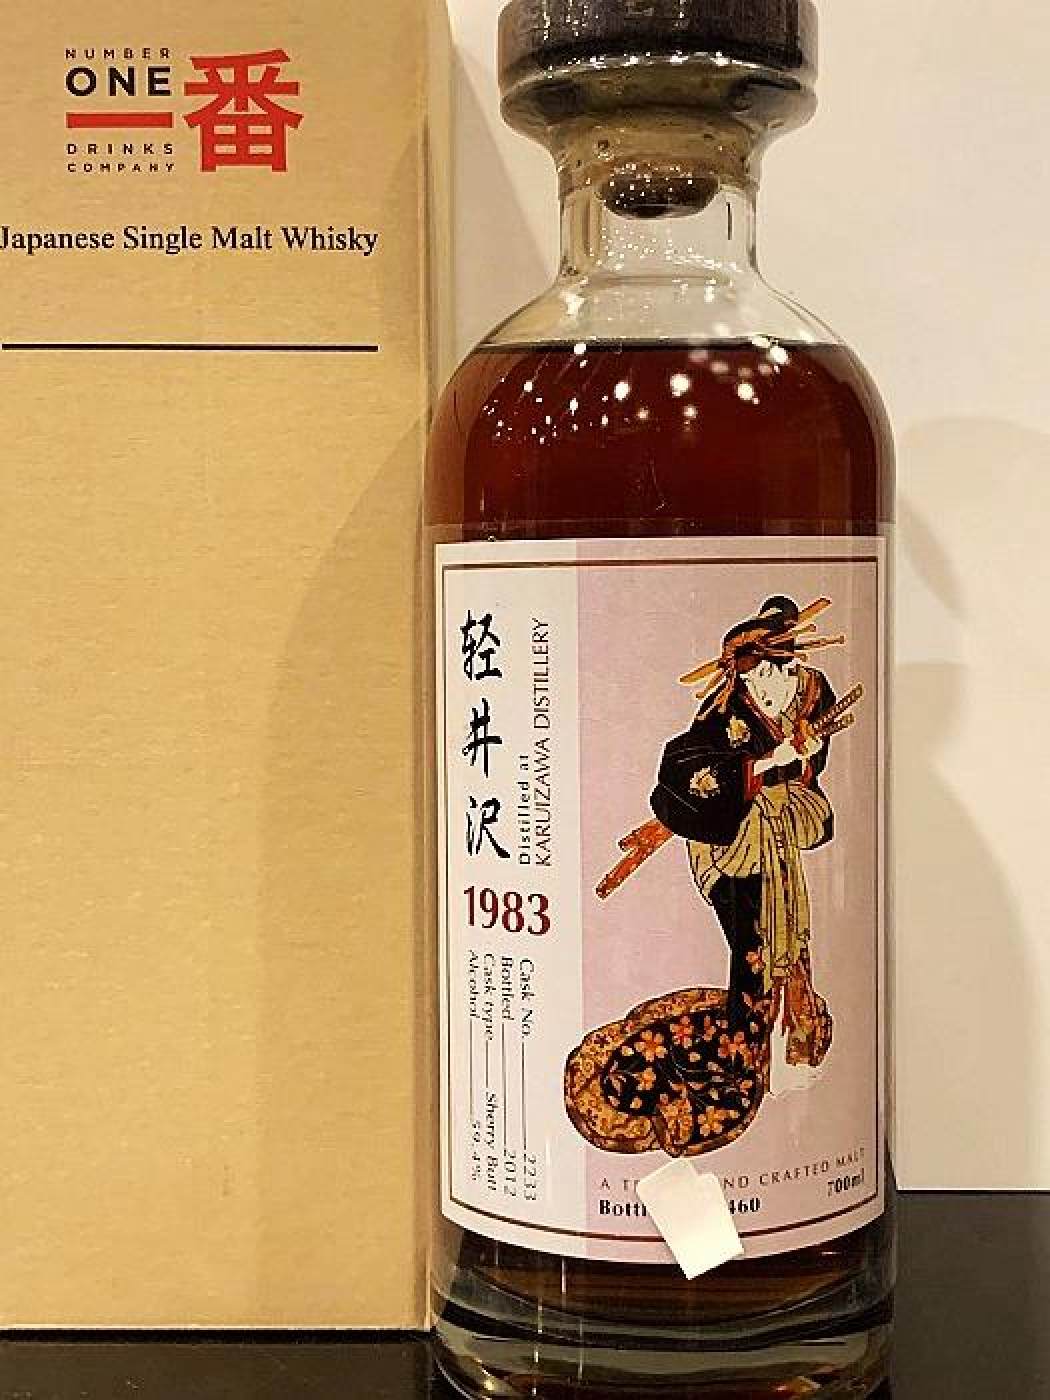 A man was swindled out of a bottle of Karuizawa 1983 whisky. Photo: Carousell